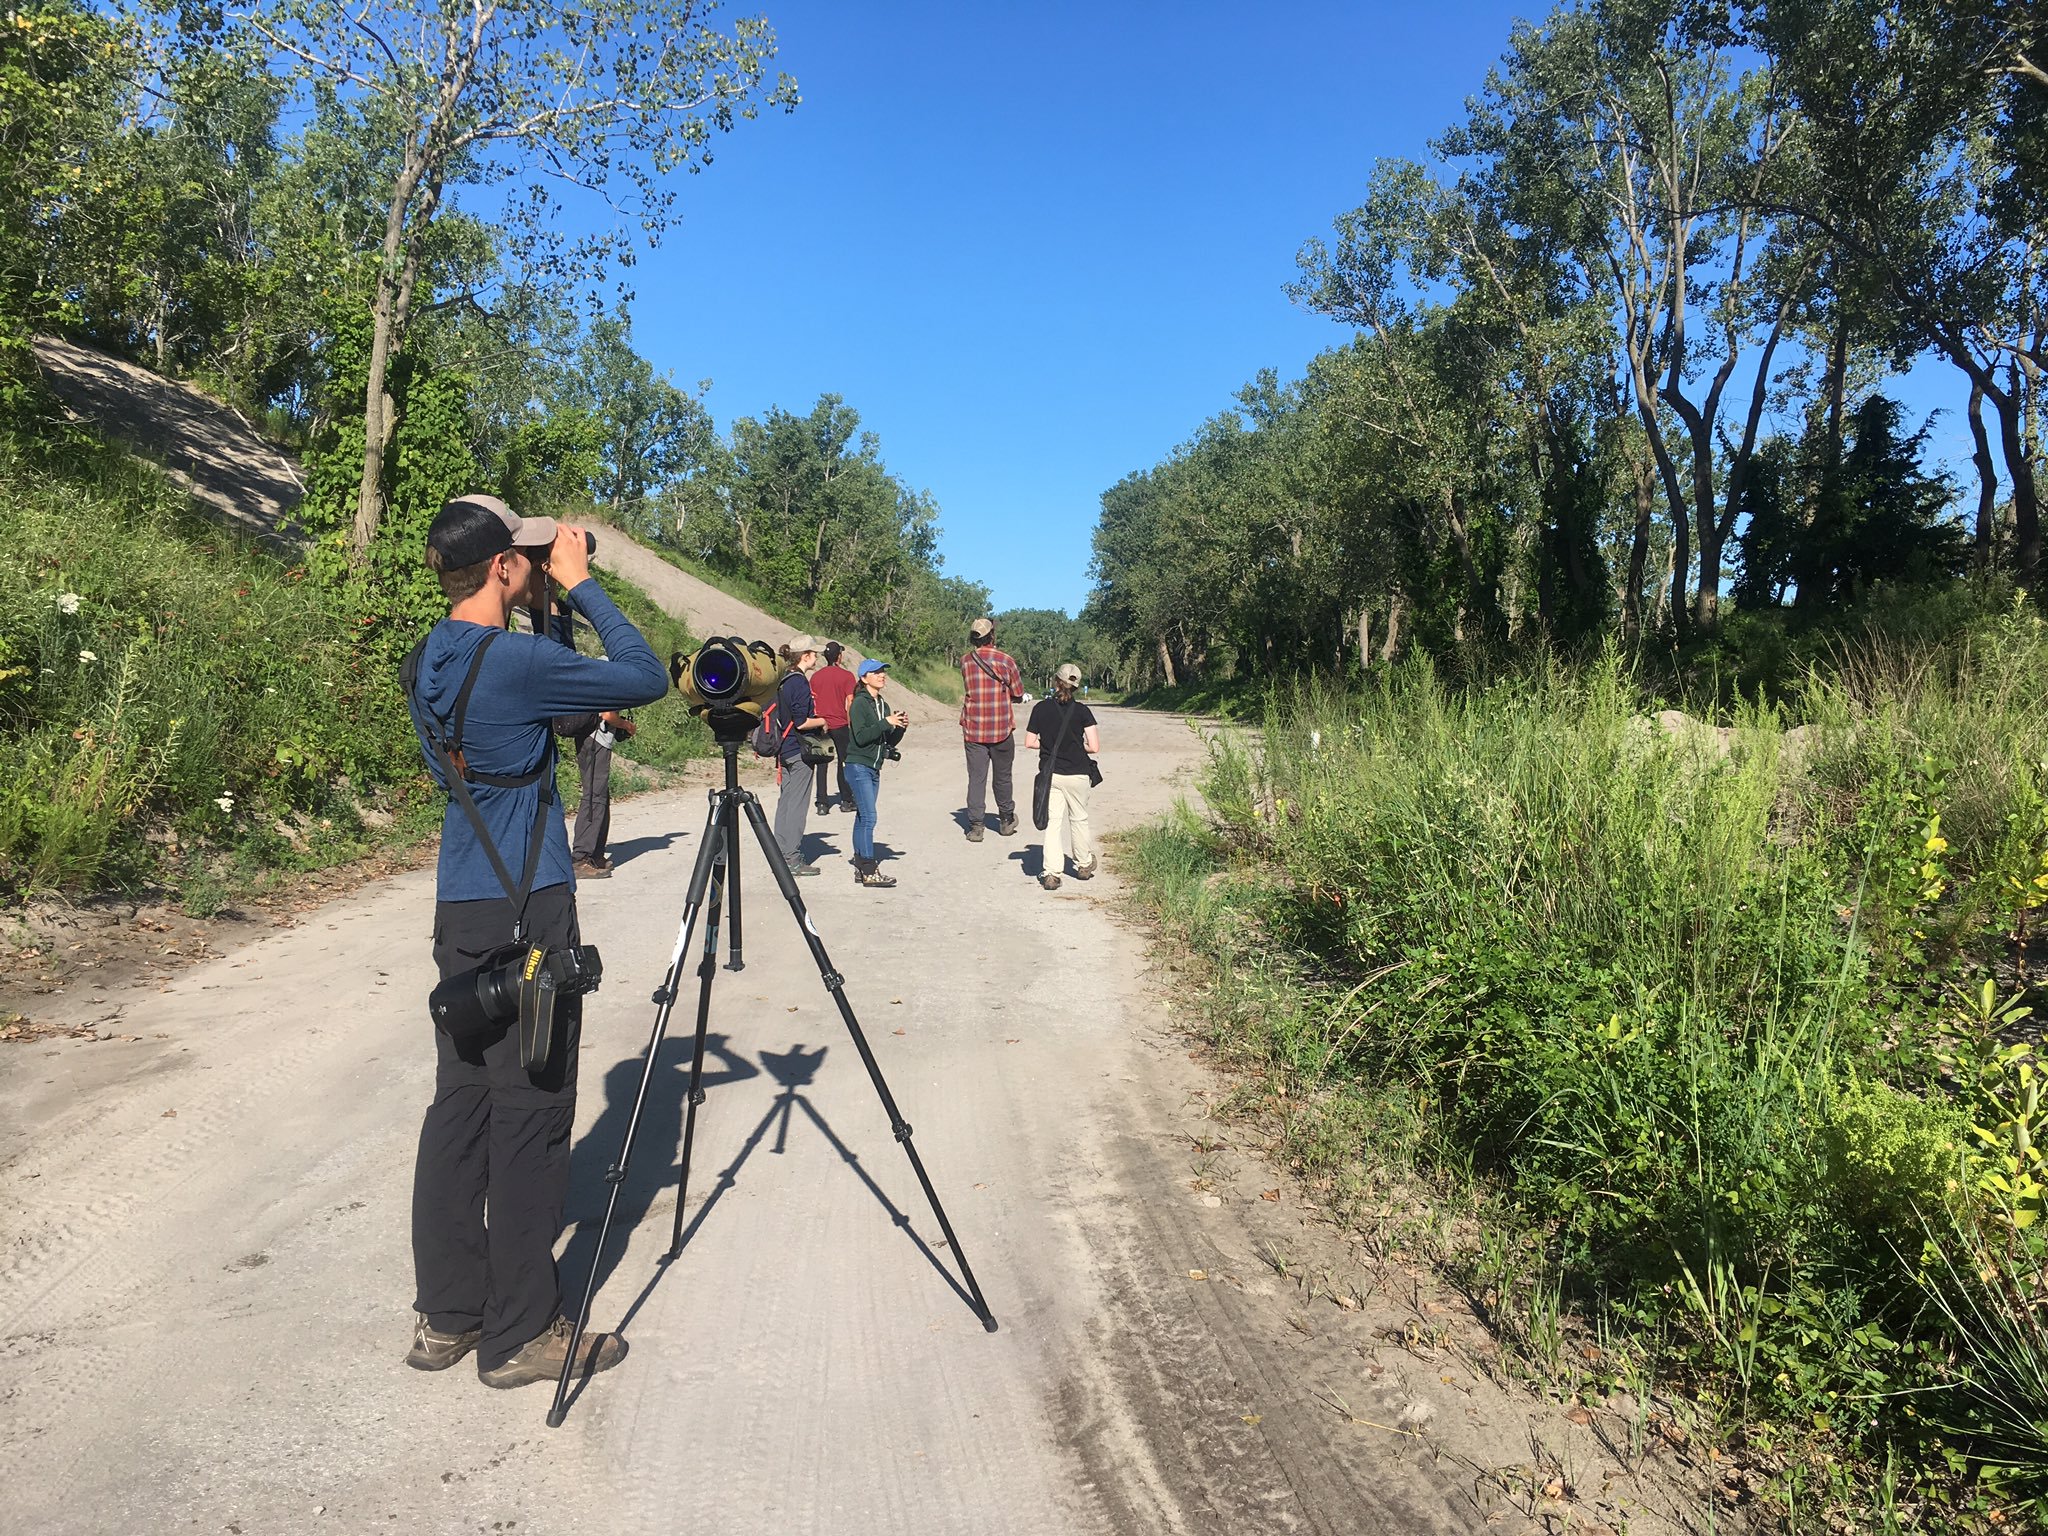 A group of young birders watching birds on a dirt road